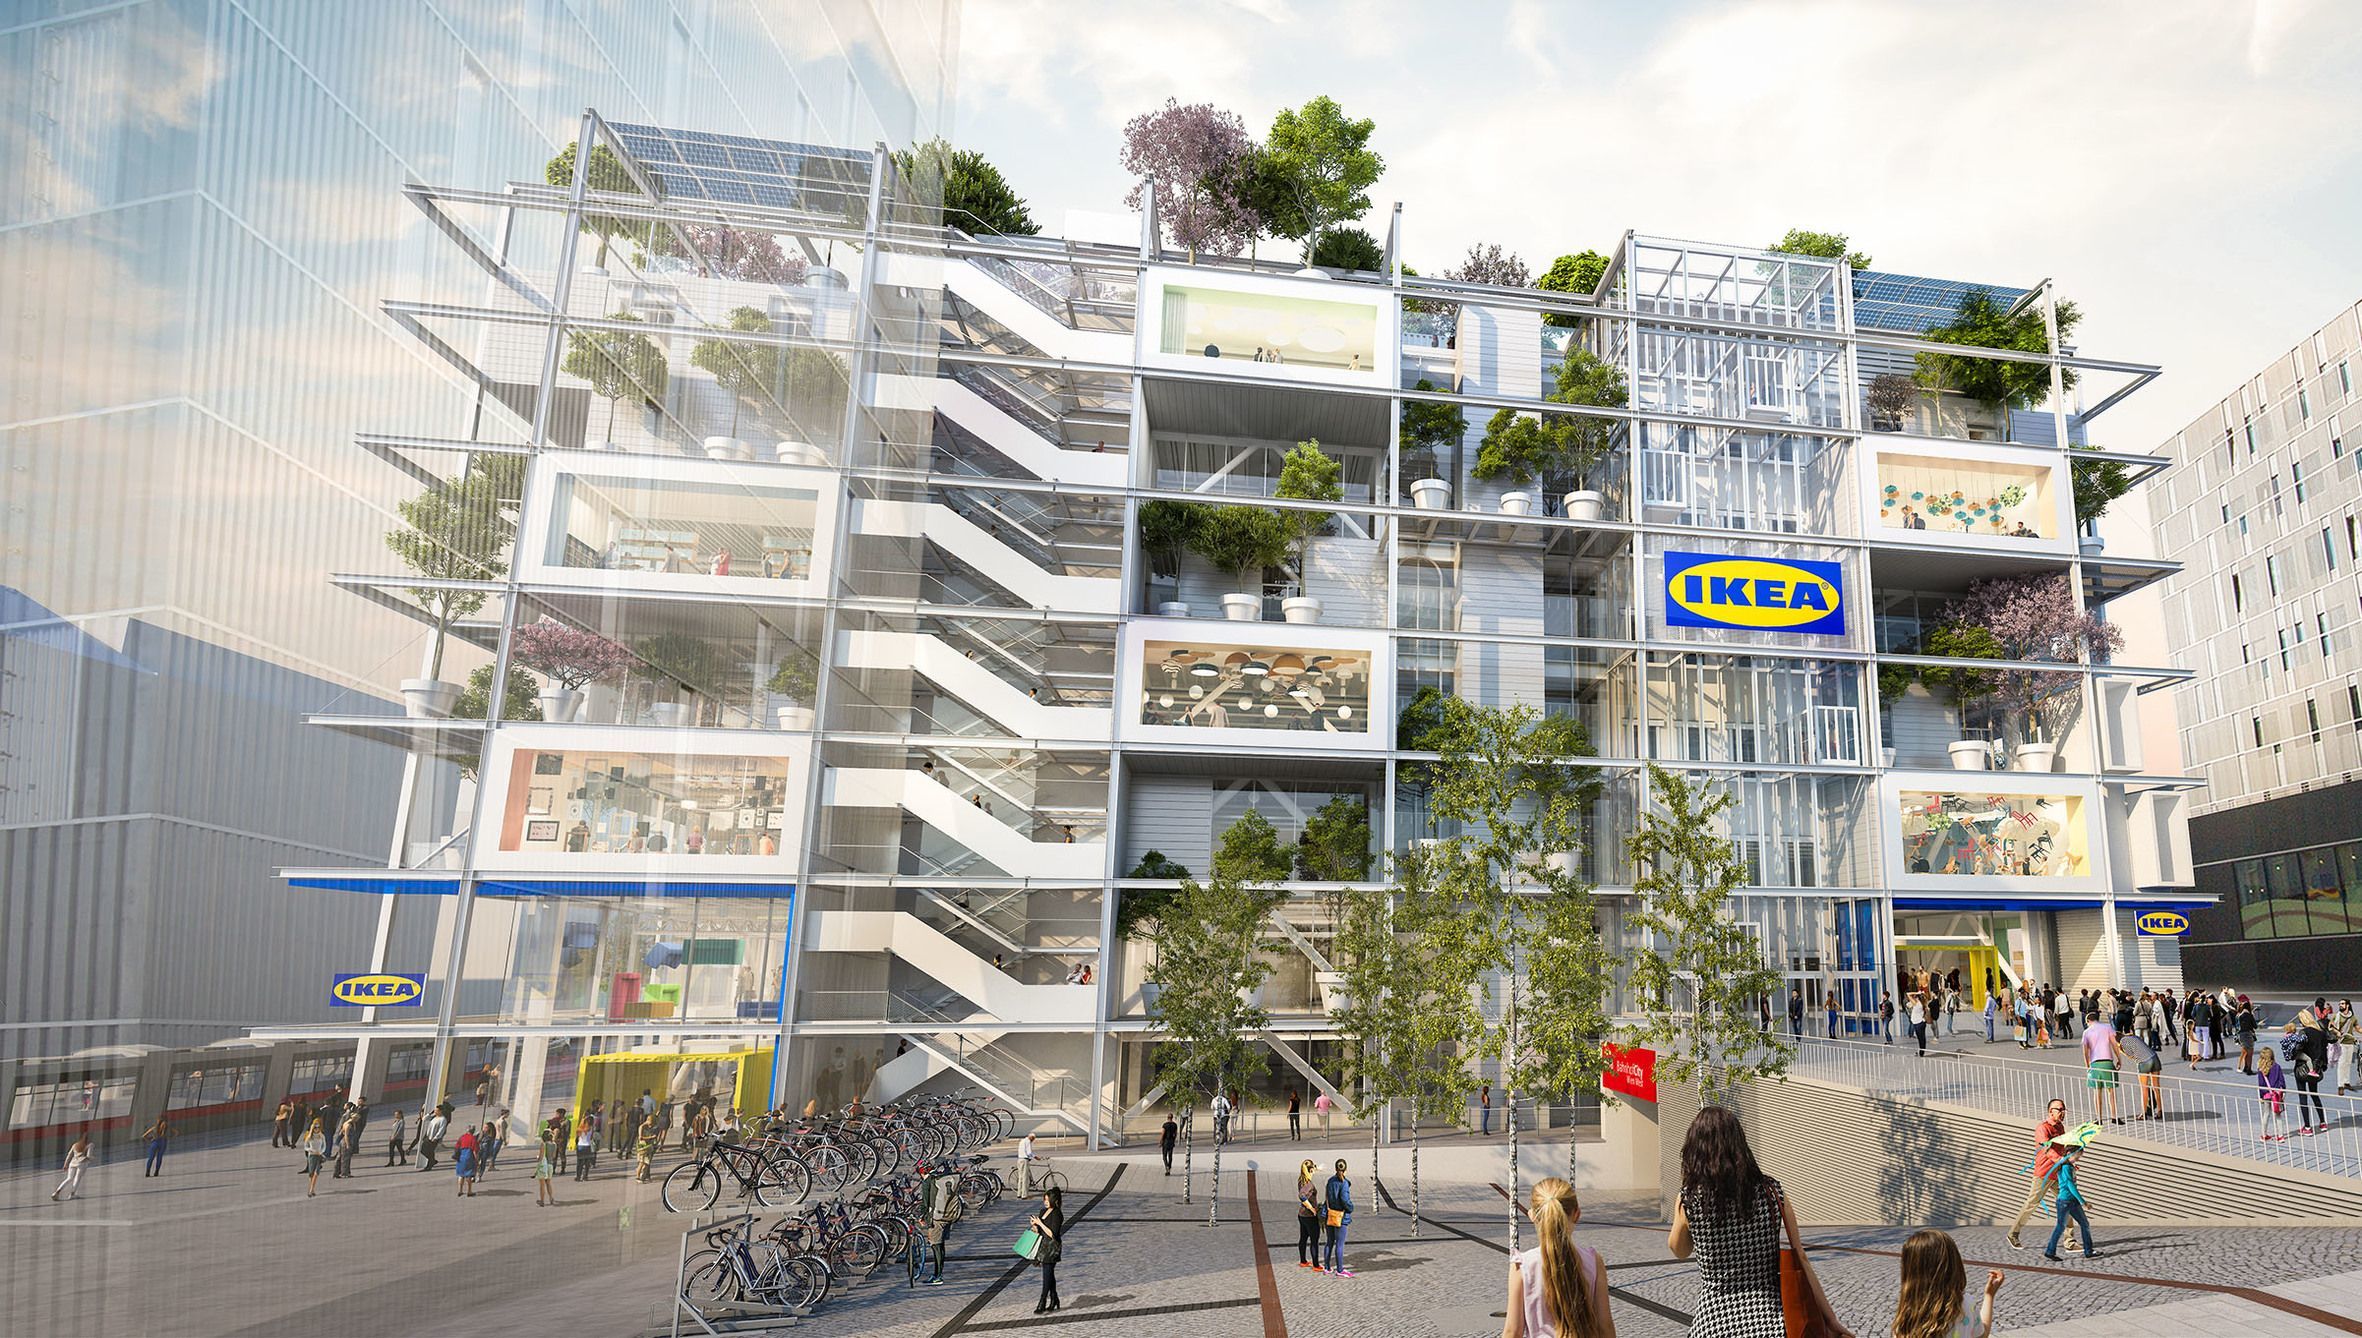 Accor Newsroom Jo Joe Moves In With Ikea At Vienna West Station